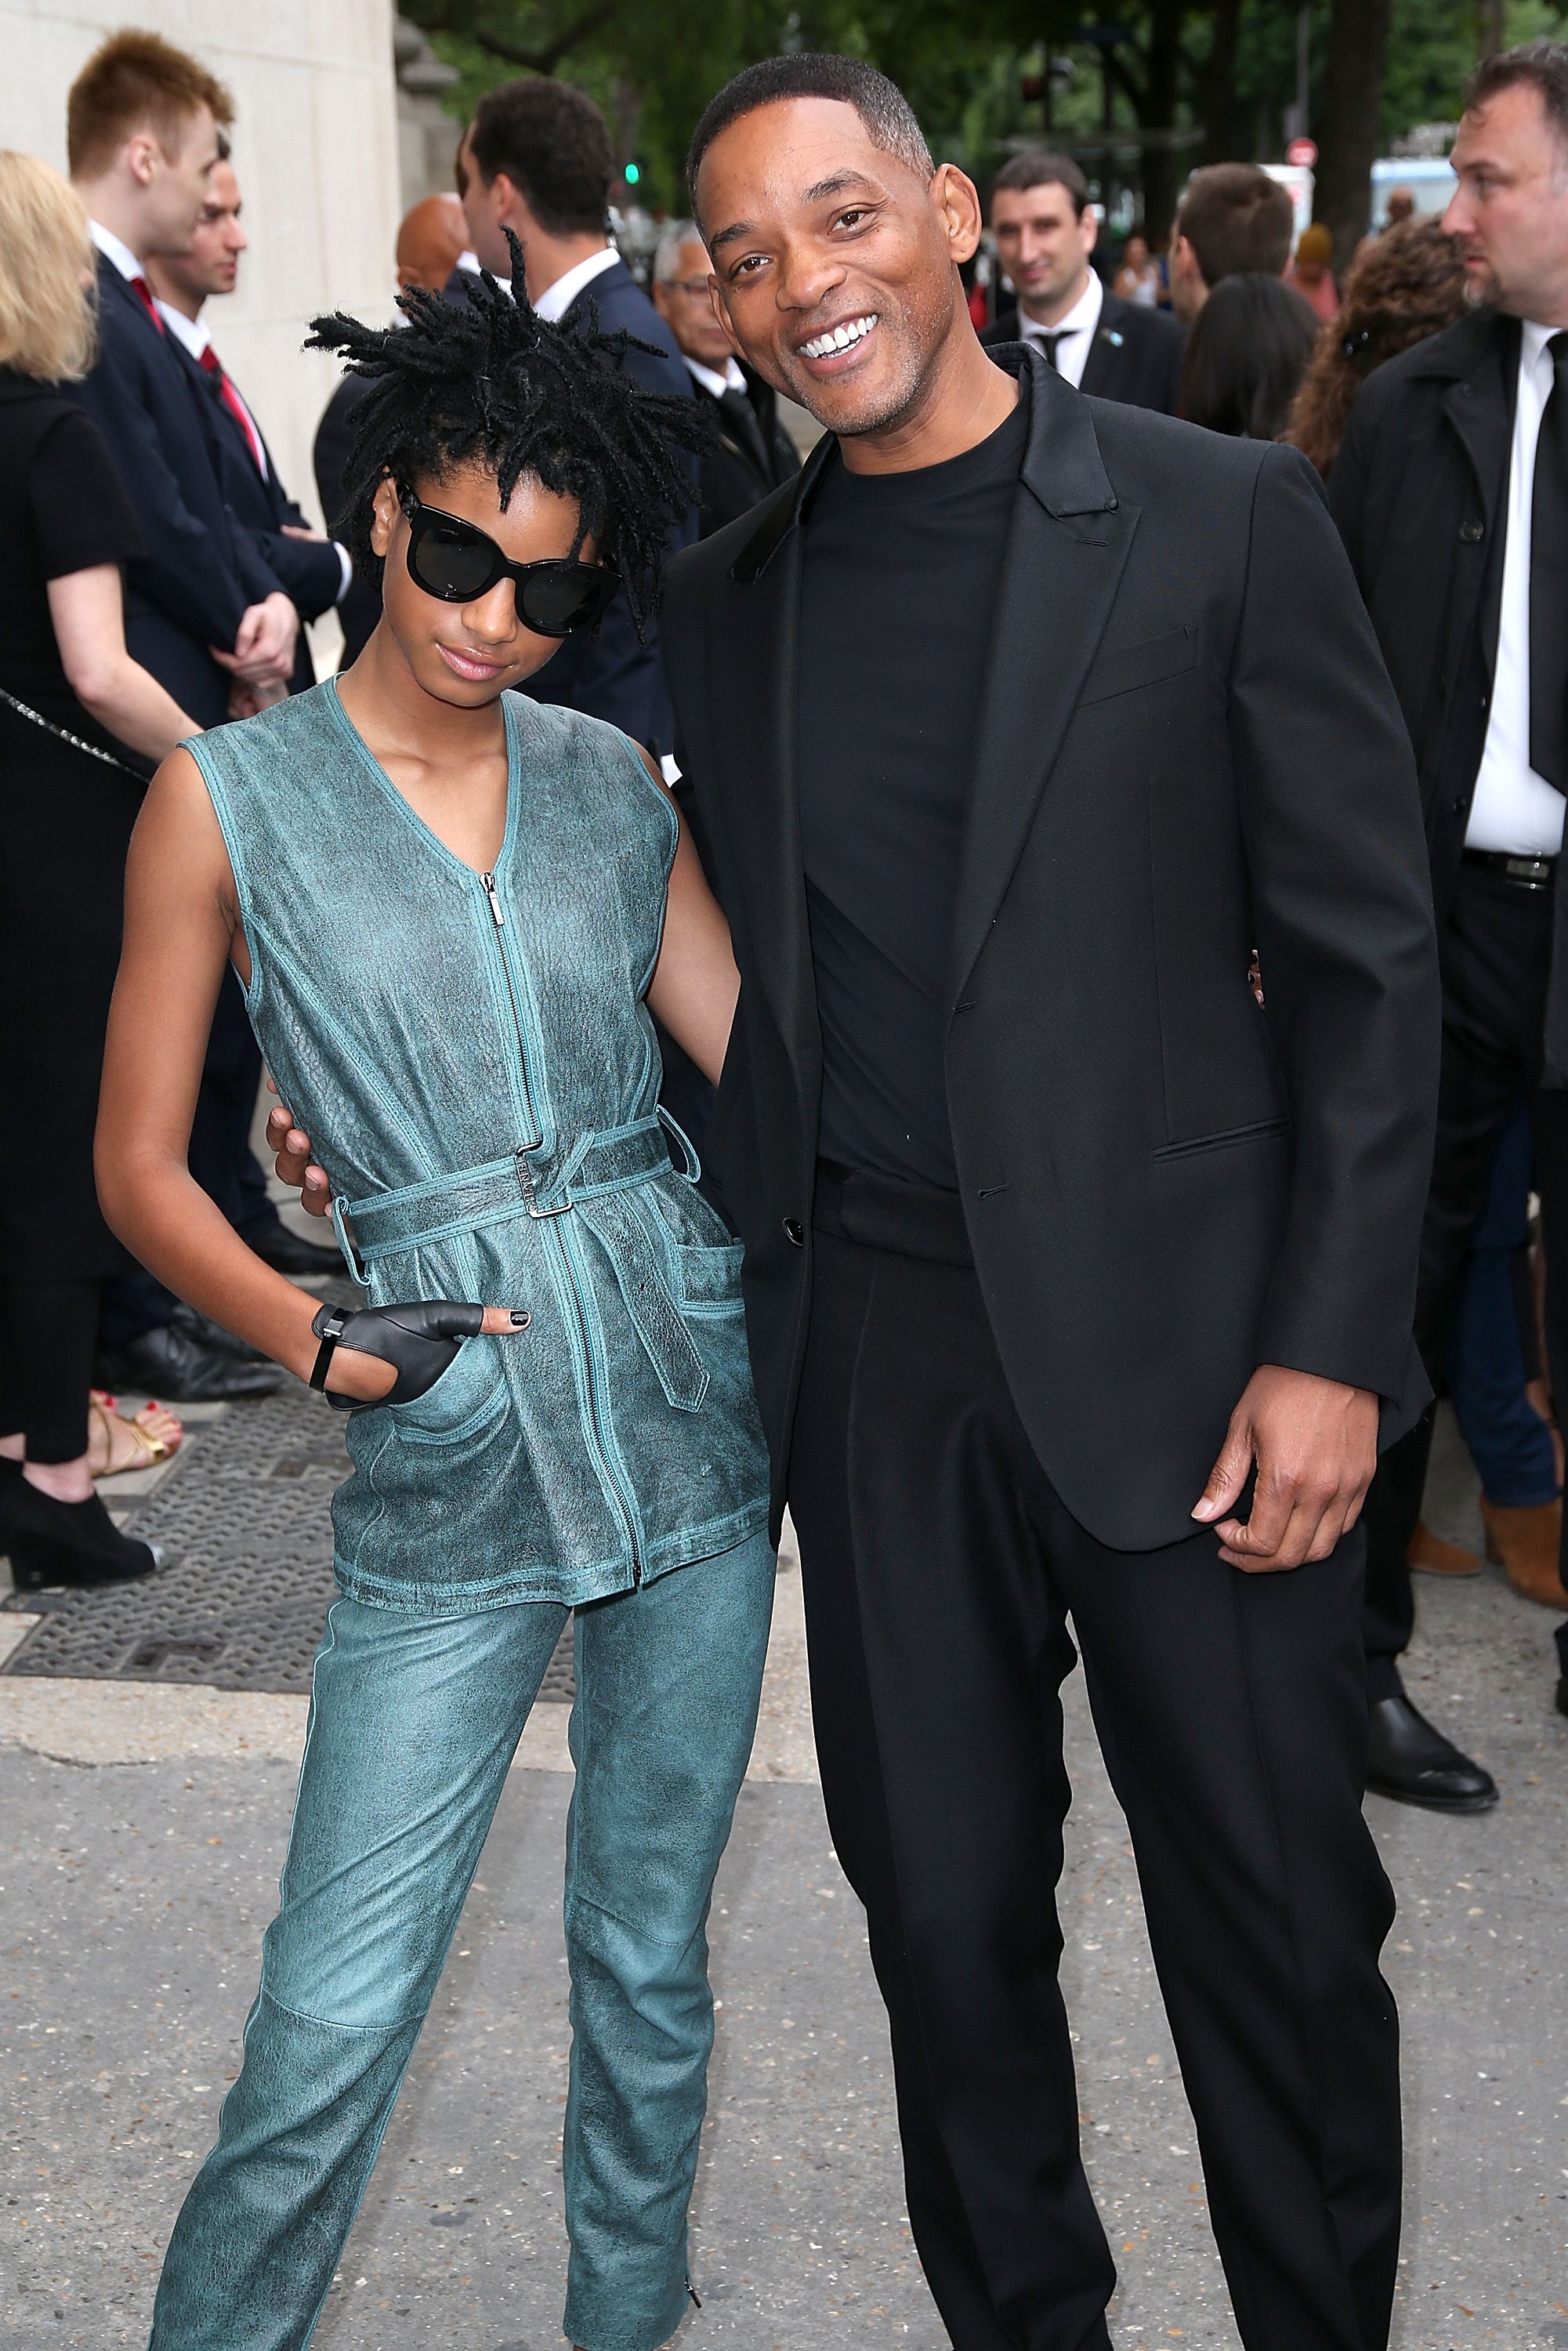 Singer-songwriter Willow Smith and father Will Smith attend Paris Fashion Week on July 5, 2016 | Photo: Getty Images